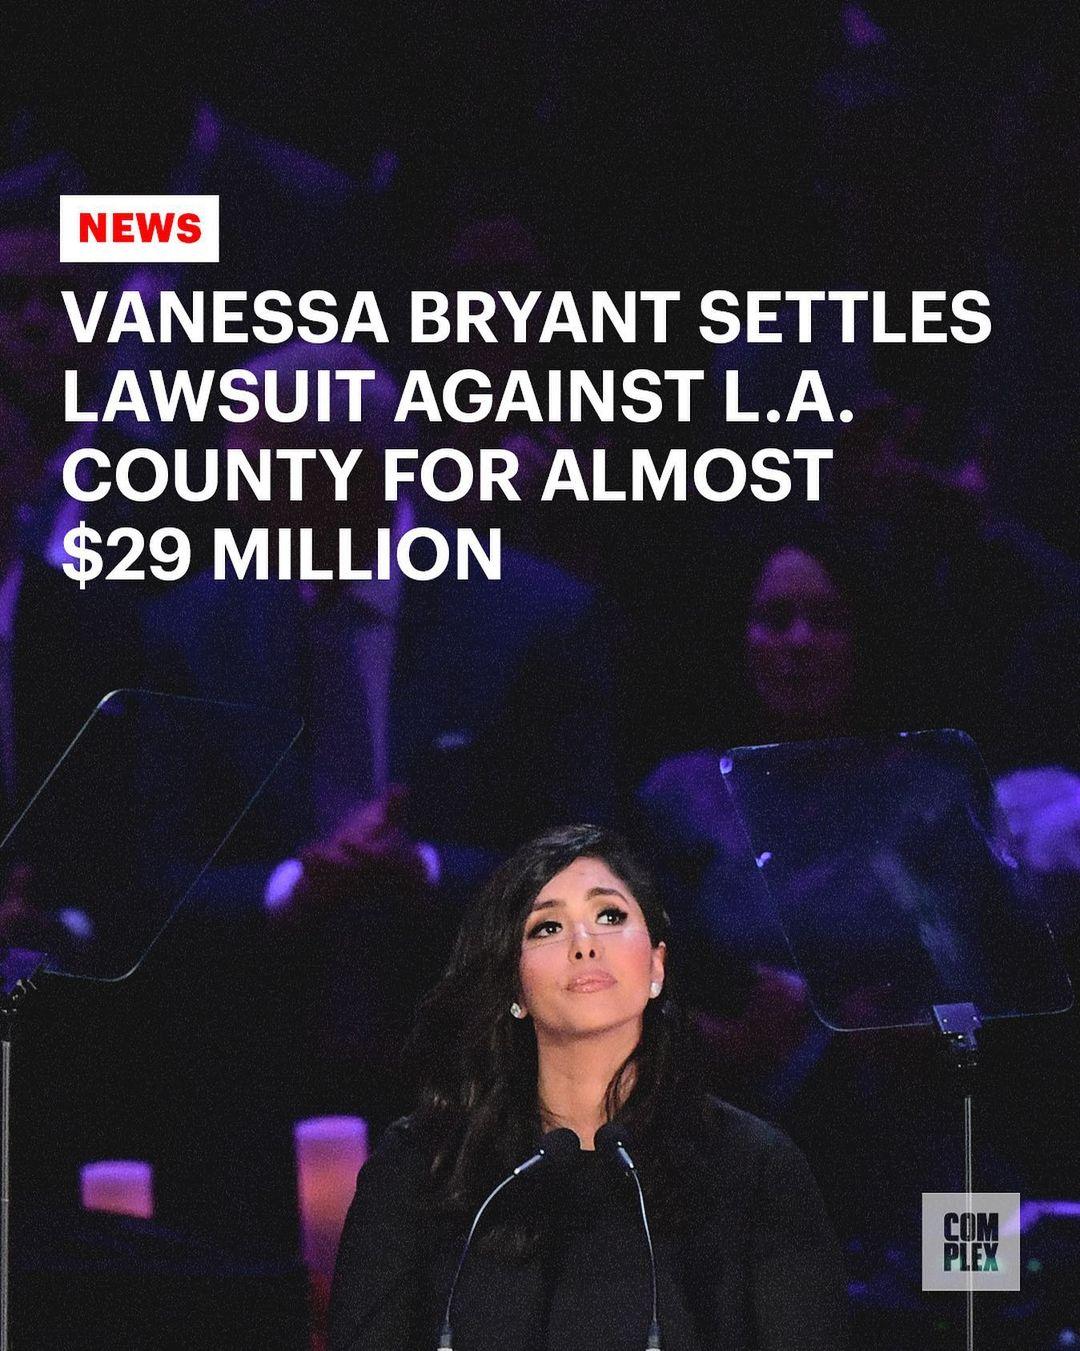 class="content__text"
 Vanessa Bryant will take a $28.85 million settlement from Los Angeles County to close out legal proceedings over shared photos of the helicopter crash that took the lives of her husband Kobe Bryant and daughter Gianna in 2020. Six other passengers perished in the accident, as well as the pilot. Link in bio 🔗 full story. 
 